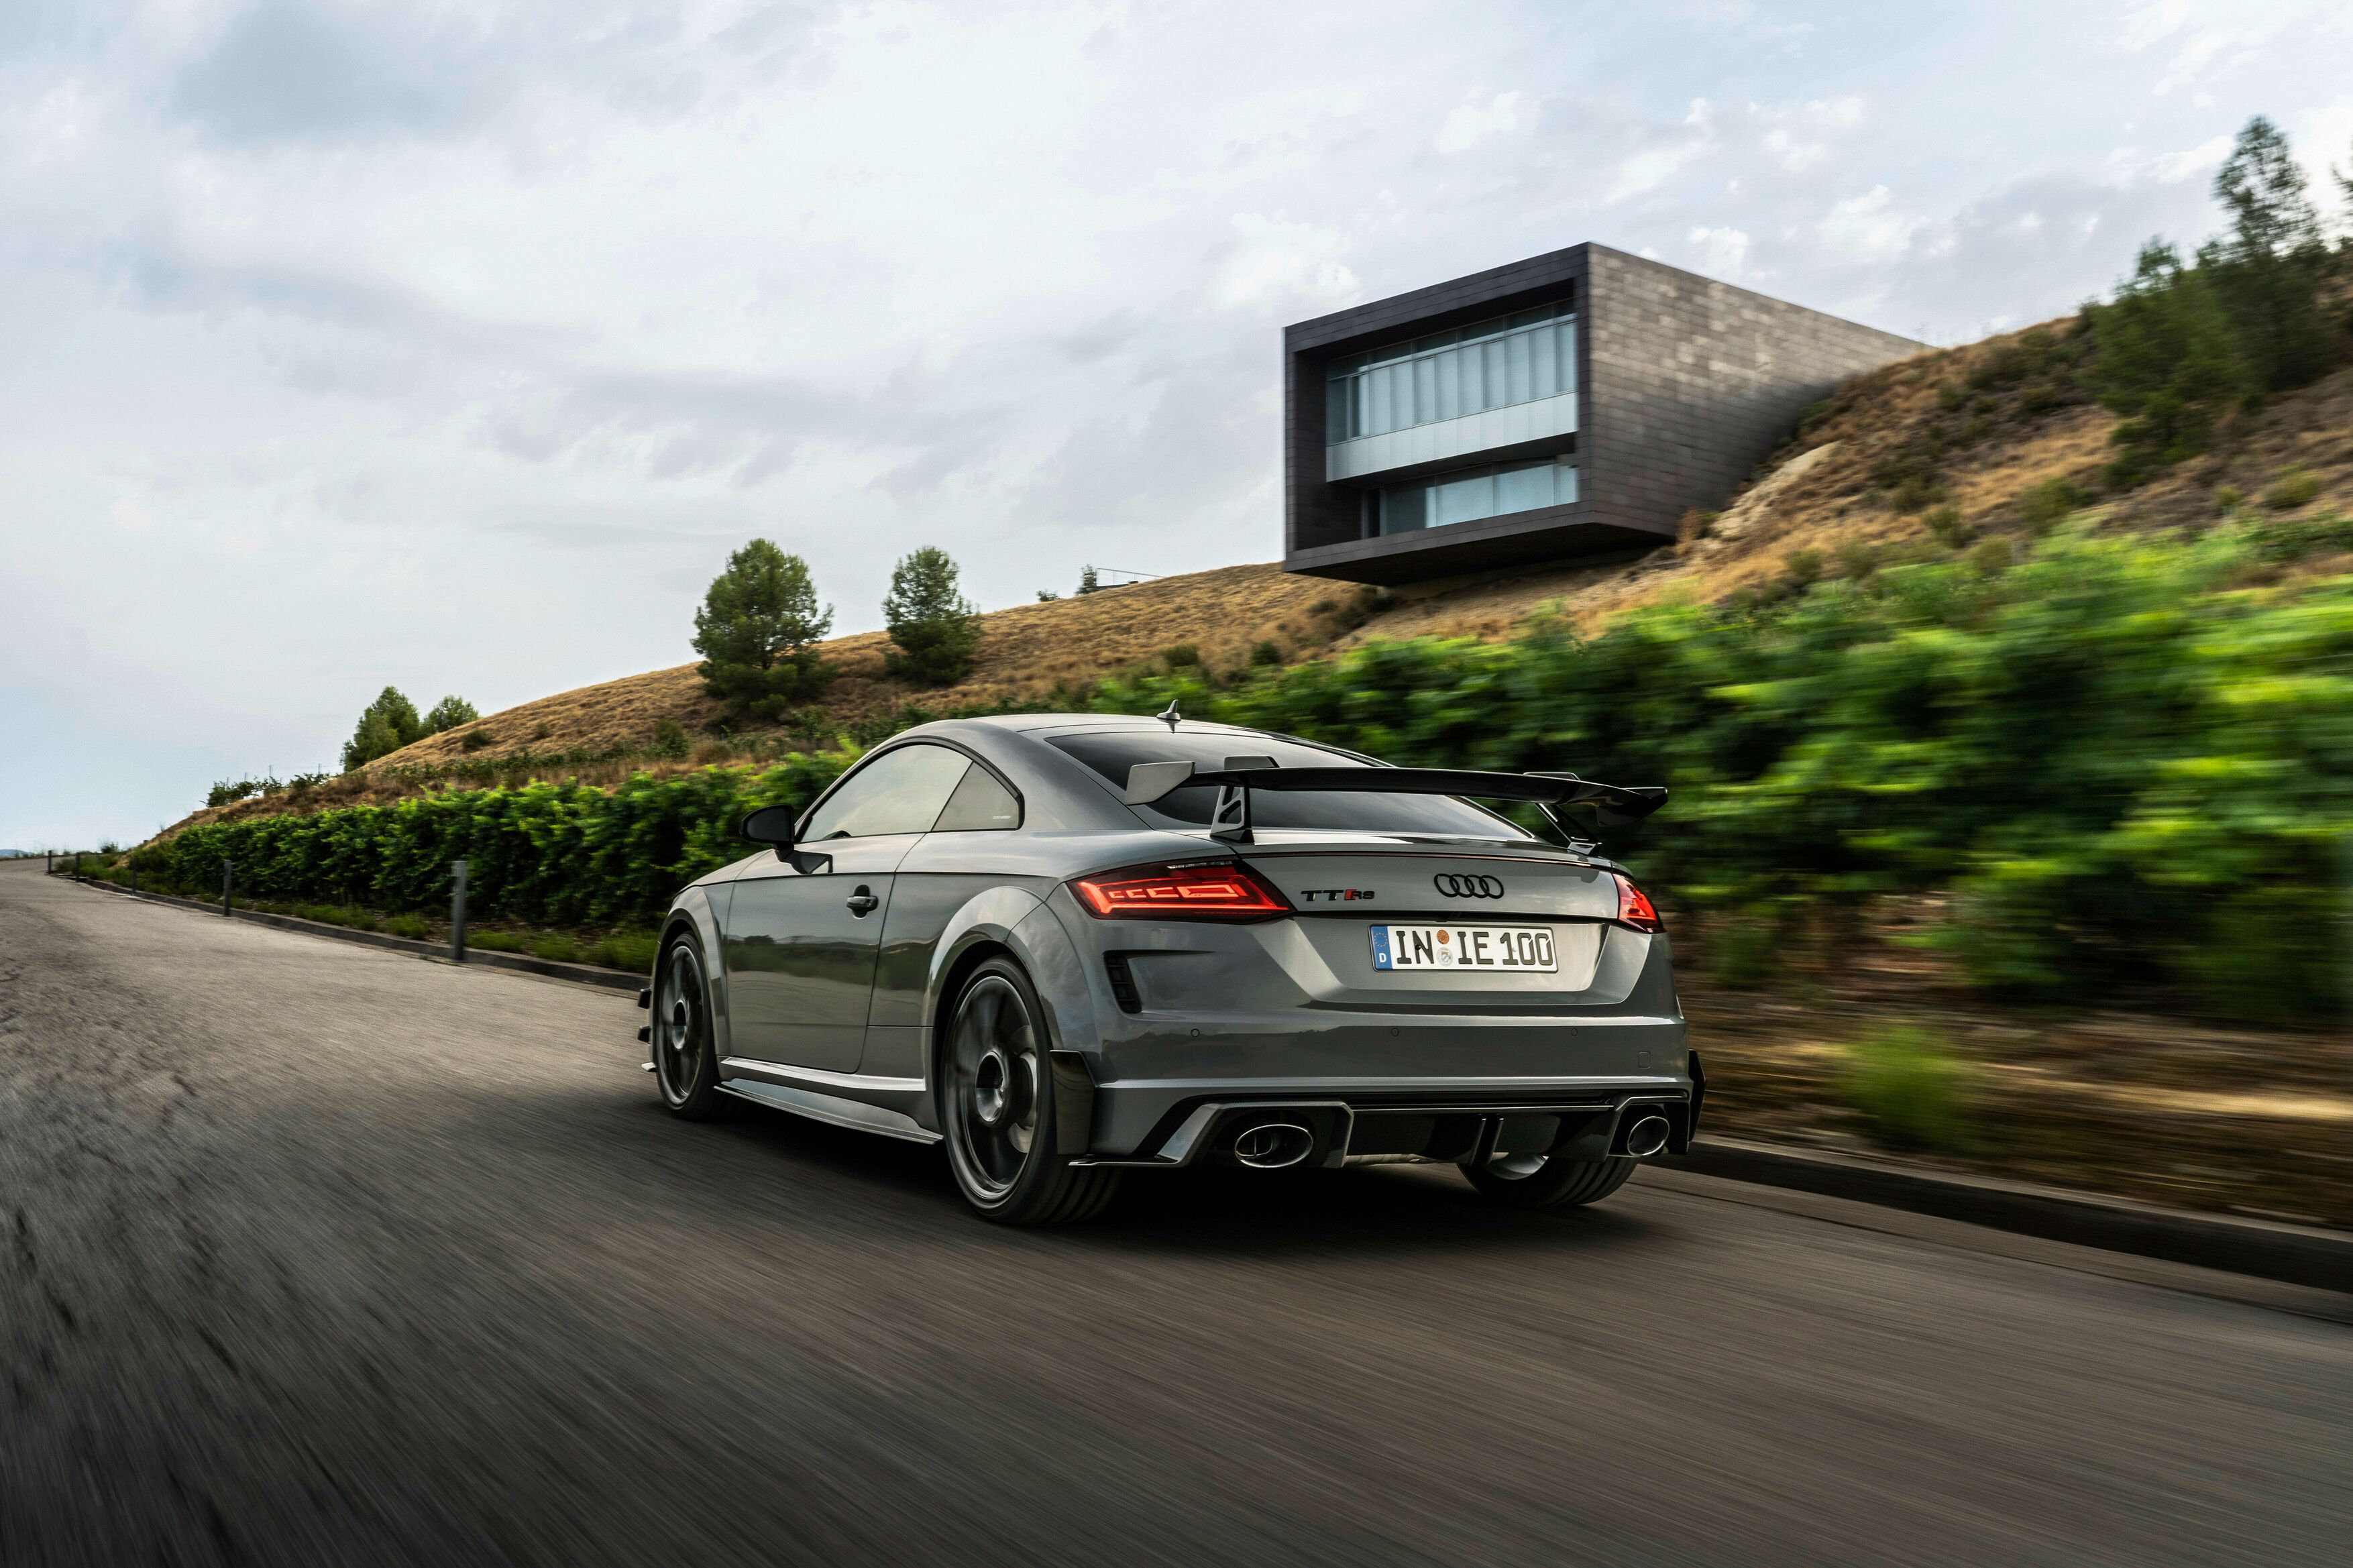 Audi TT RS Iconic Edition Rear Quarter View Driving